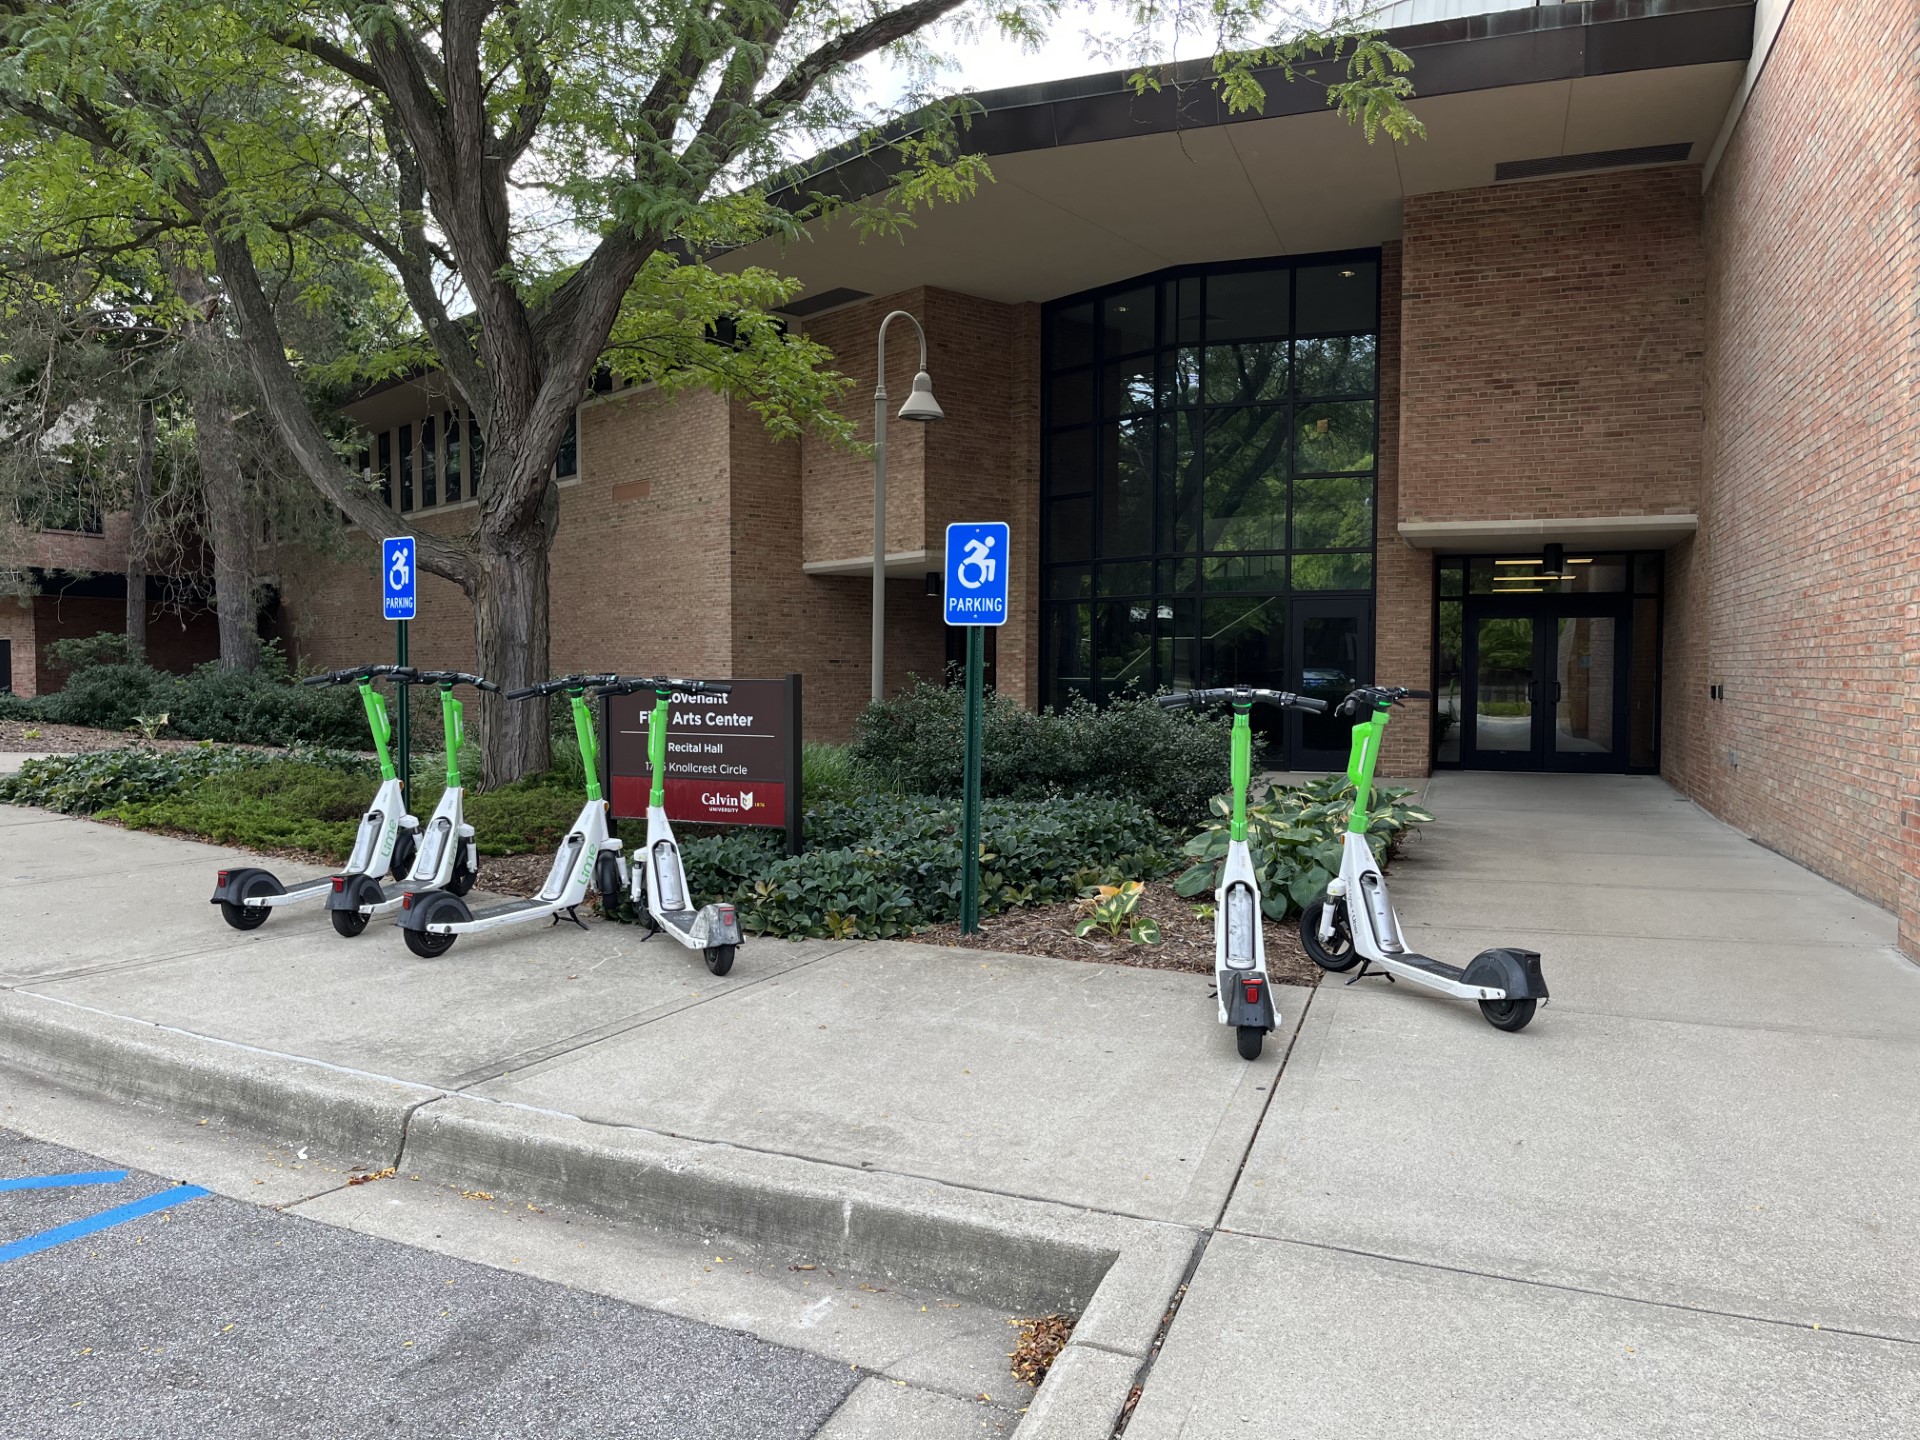 Lime scooters provide opportunities transportation and recreation, but can be a barrier if improperly parked. 